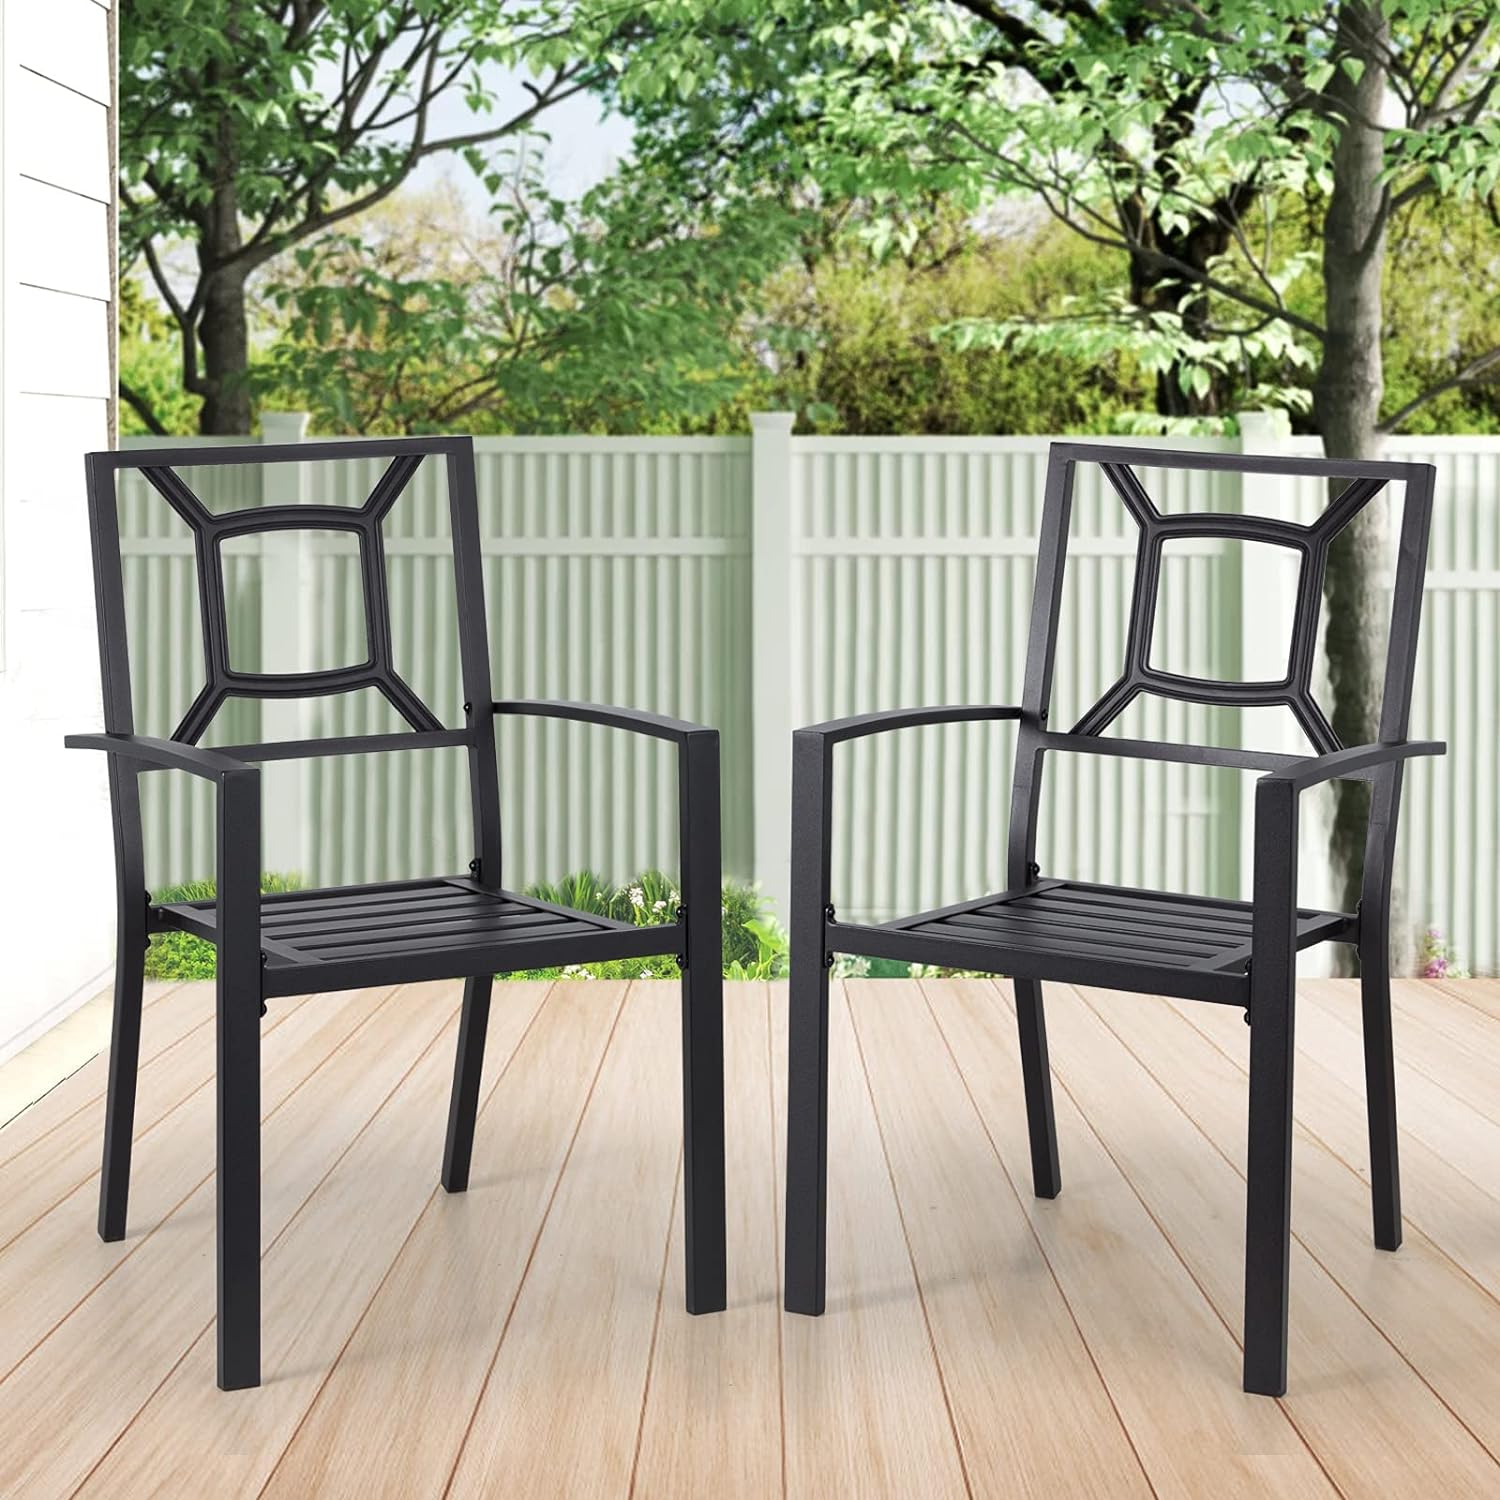 AECOJOY Patio Chairs Set of 2, Black Metal Outdoor Chairs Set (Stackable), Iron Heavy-Duty Outoodr Dining Chairs for Outside, Patio, Porch and More